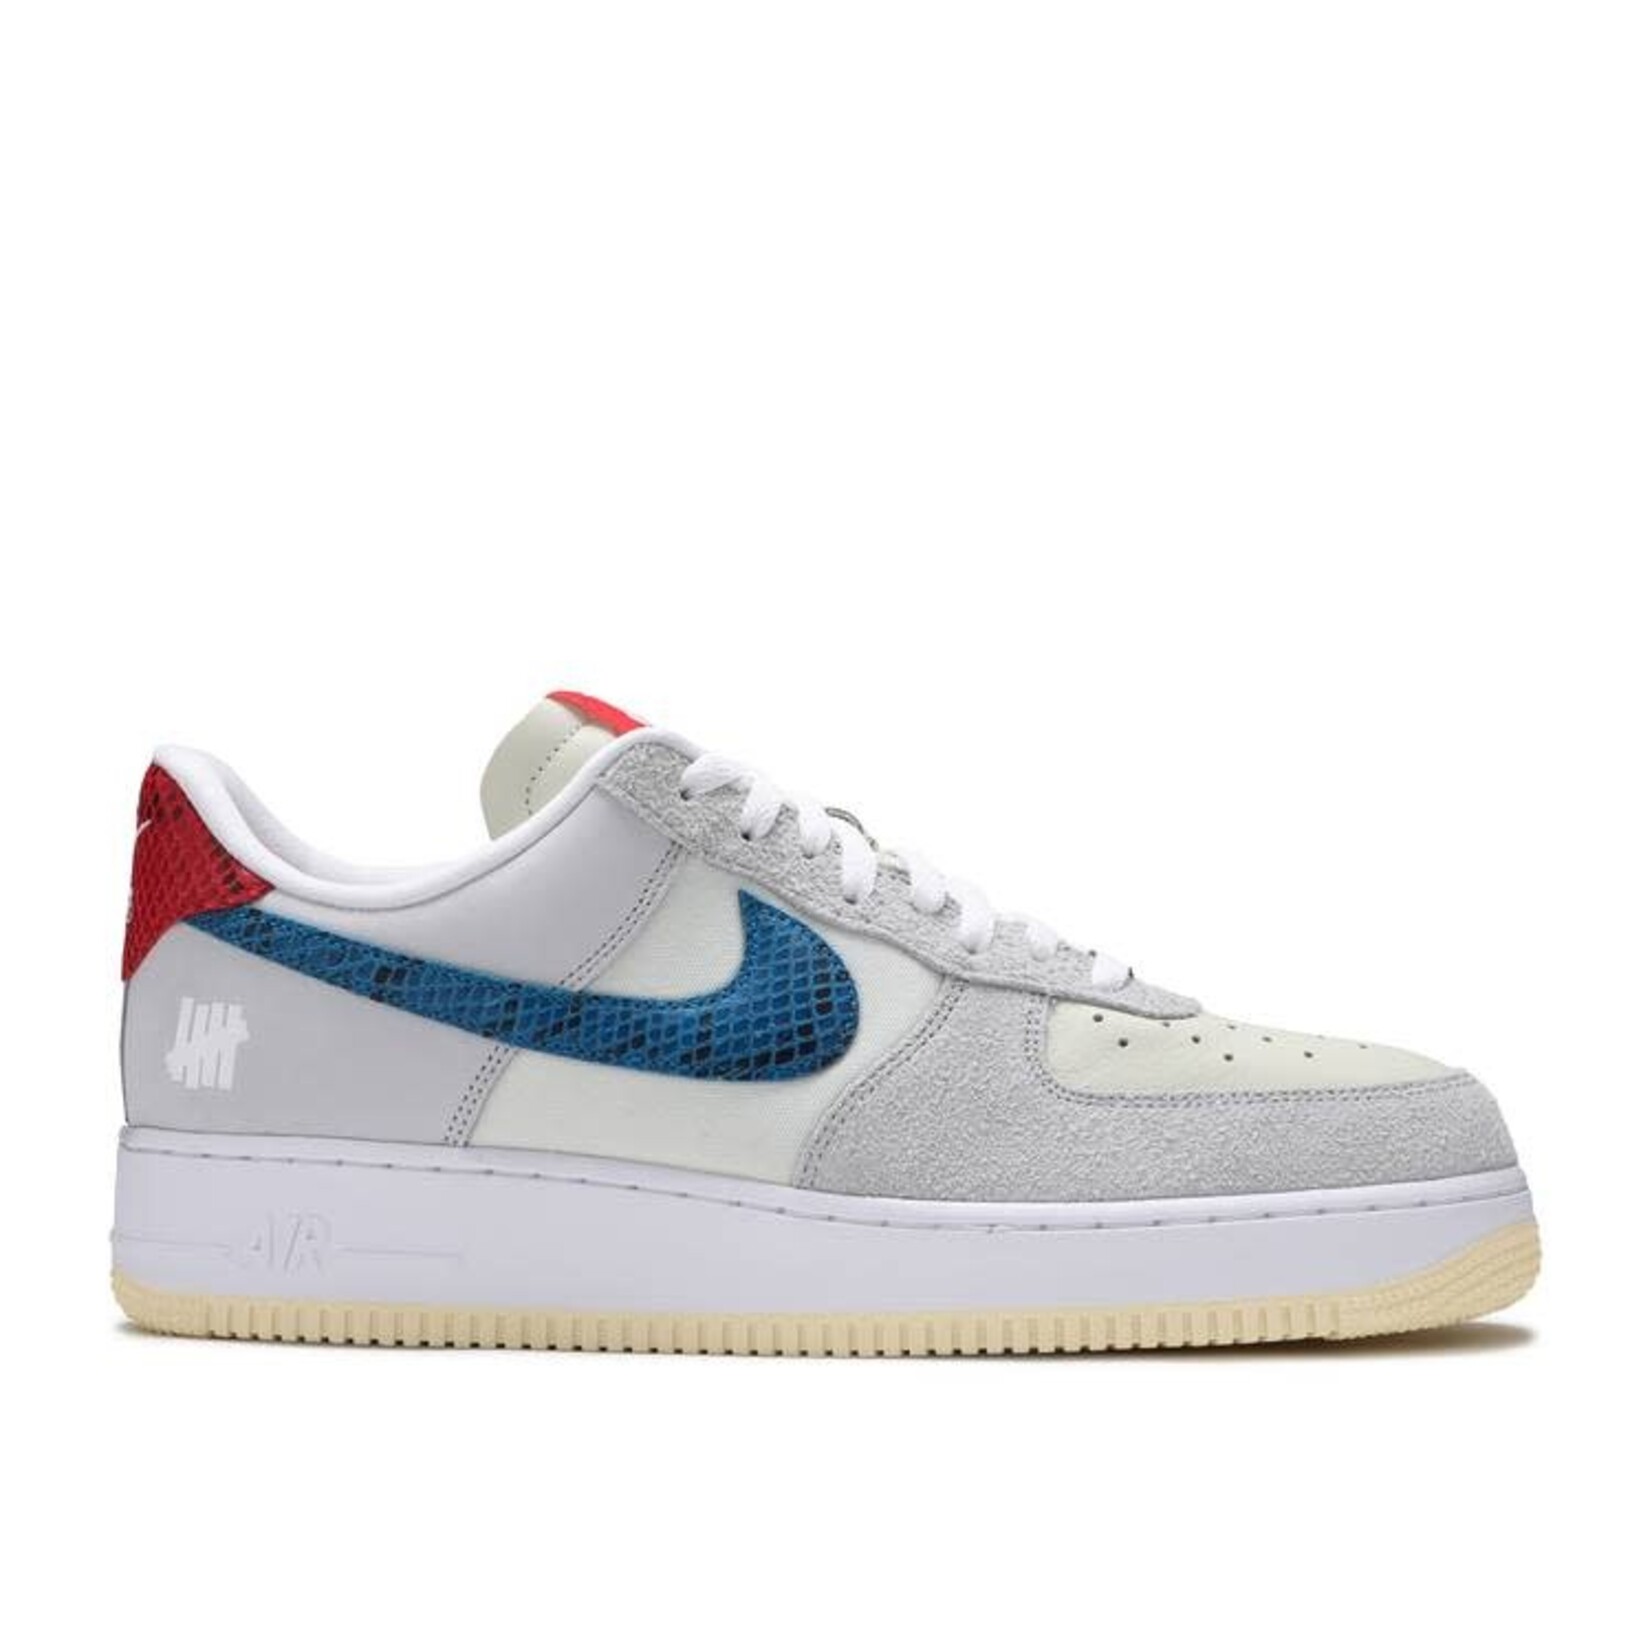 Nike Nike Air Force 1 Low SP Undefeated 5 On It Dunk vs. AF1 Size